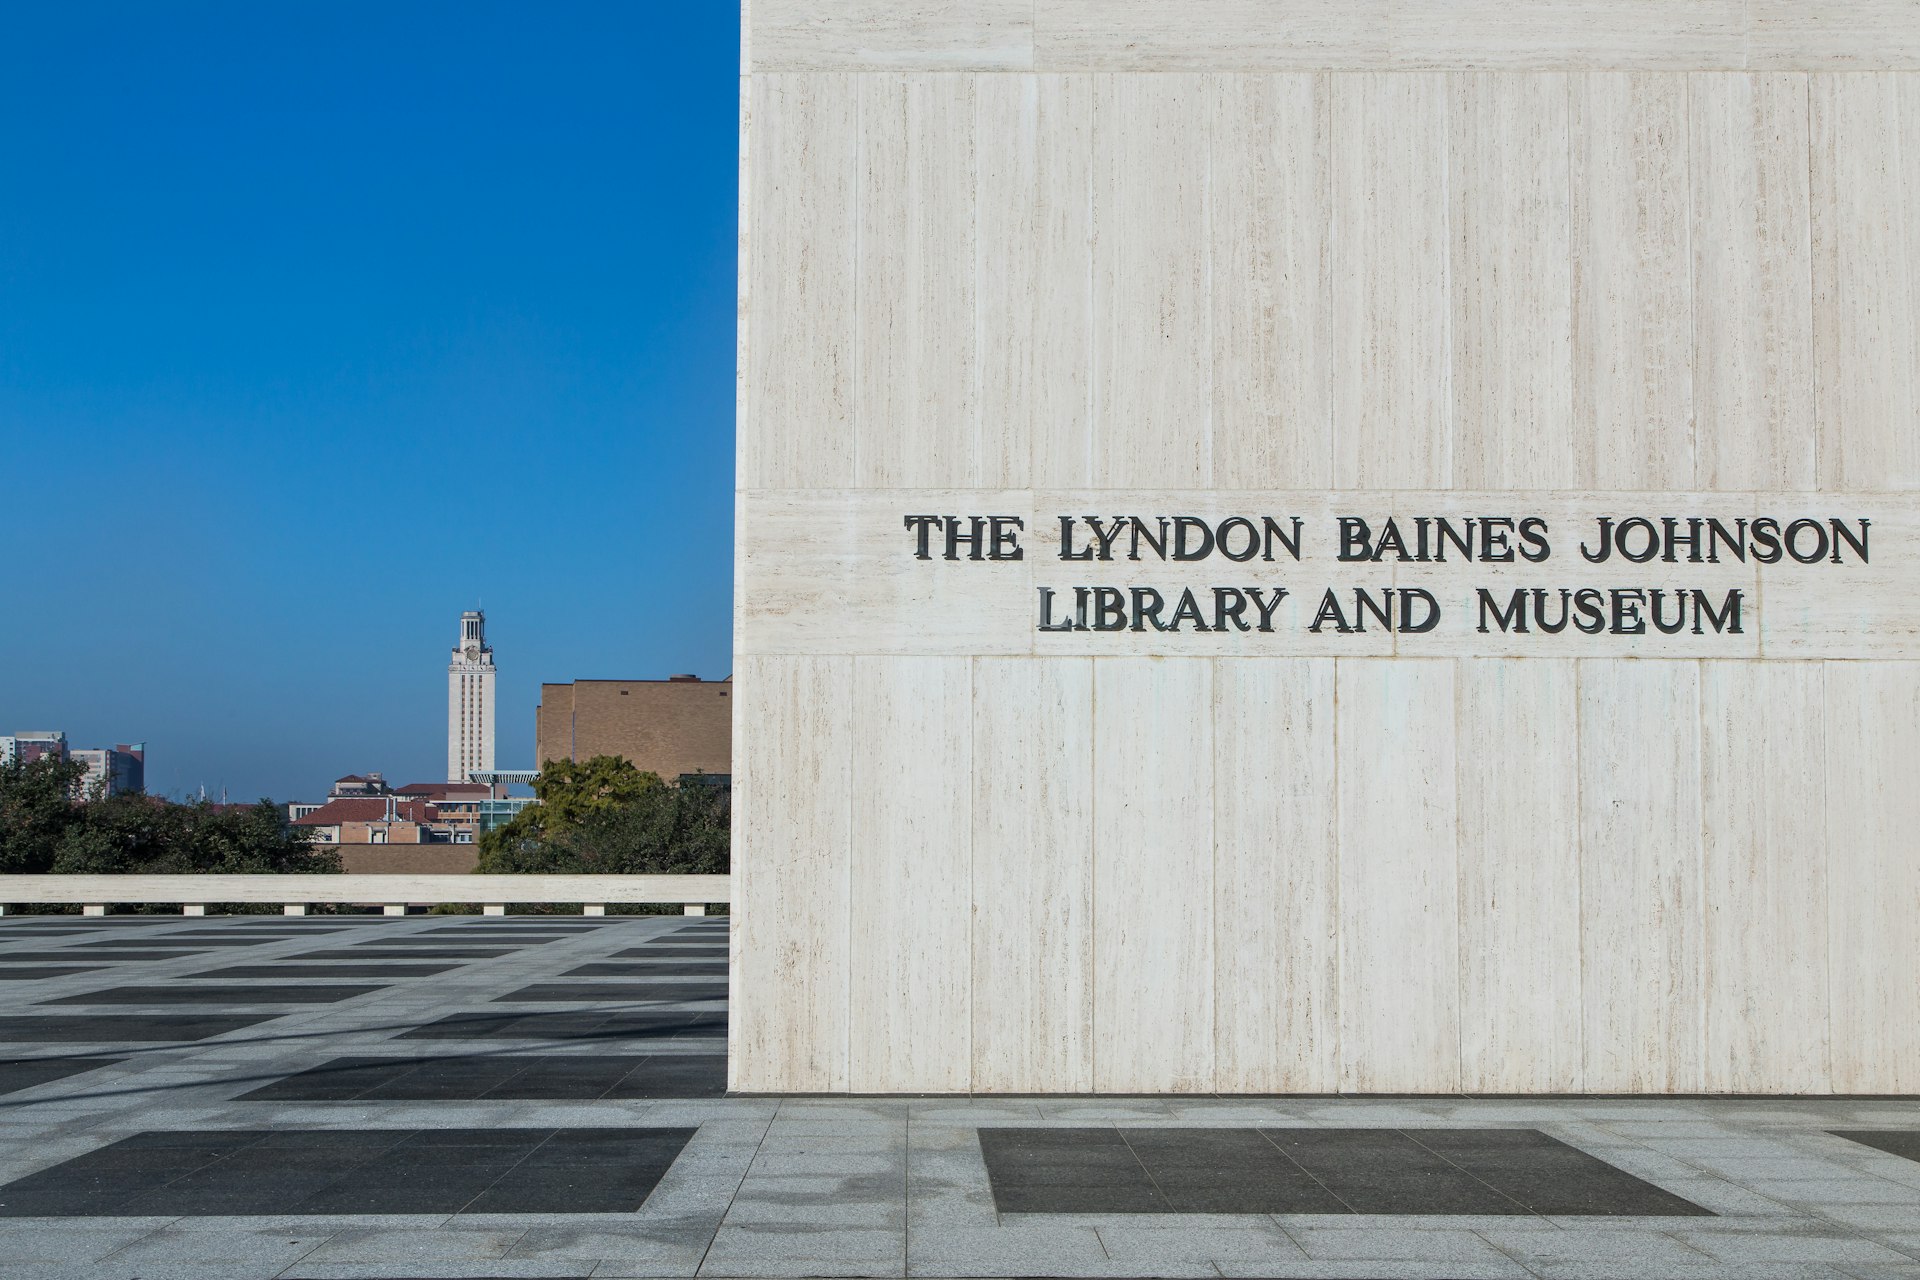 The outside of the Lyndon Baines Johnson LIbrary and Museum is pictured